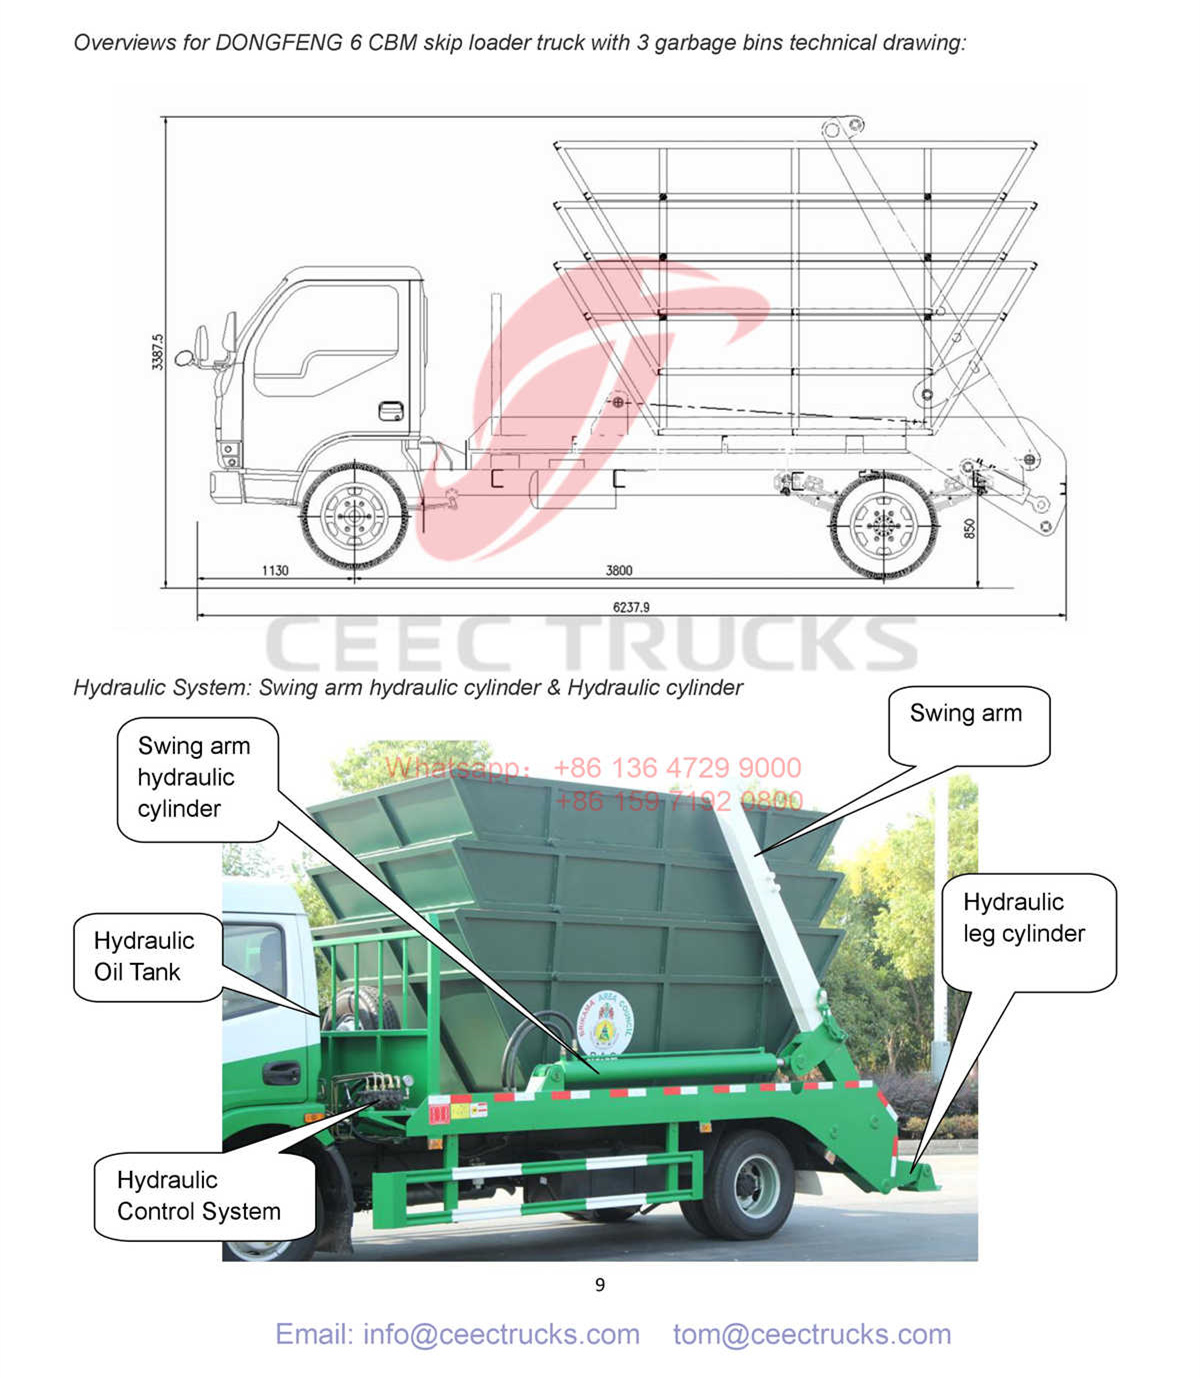 What is skip loader truck?